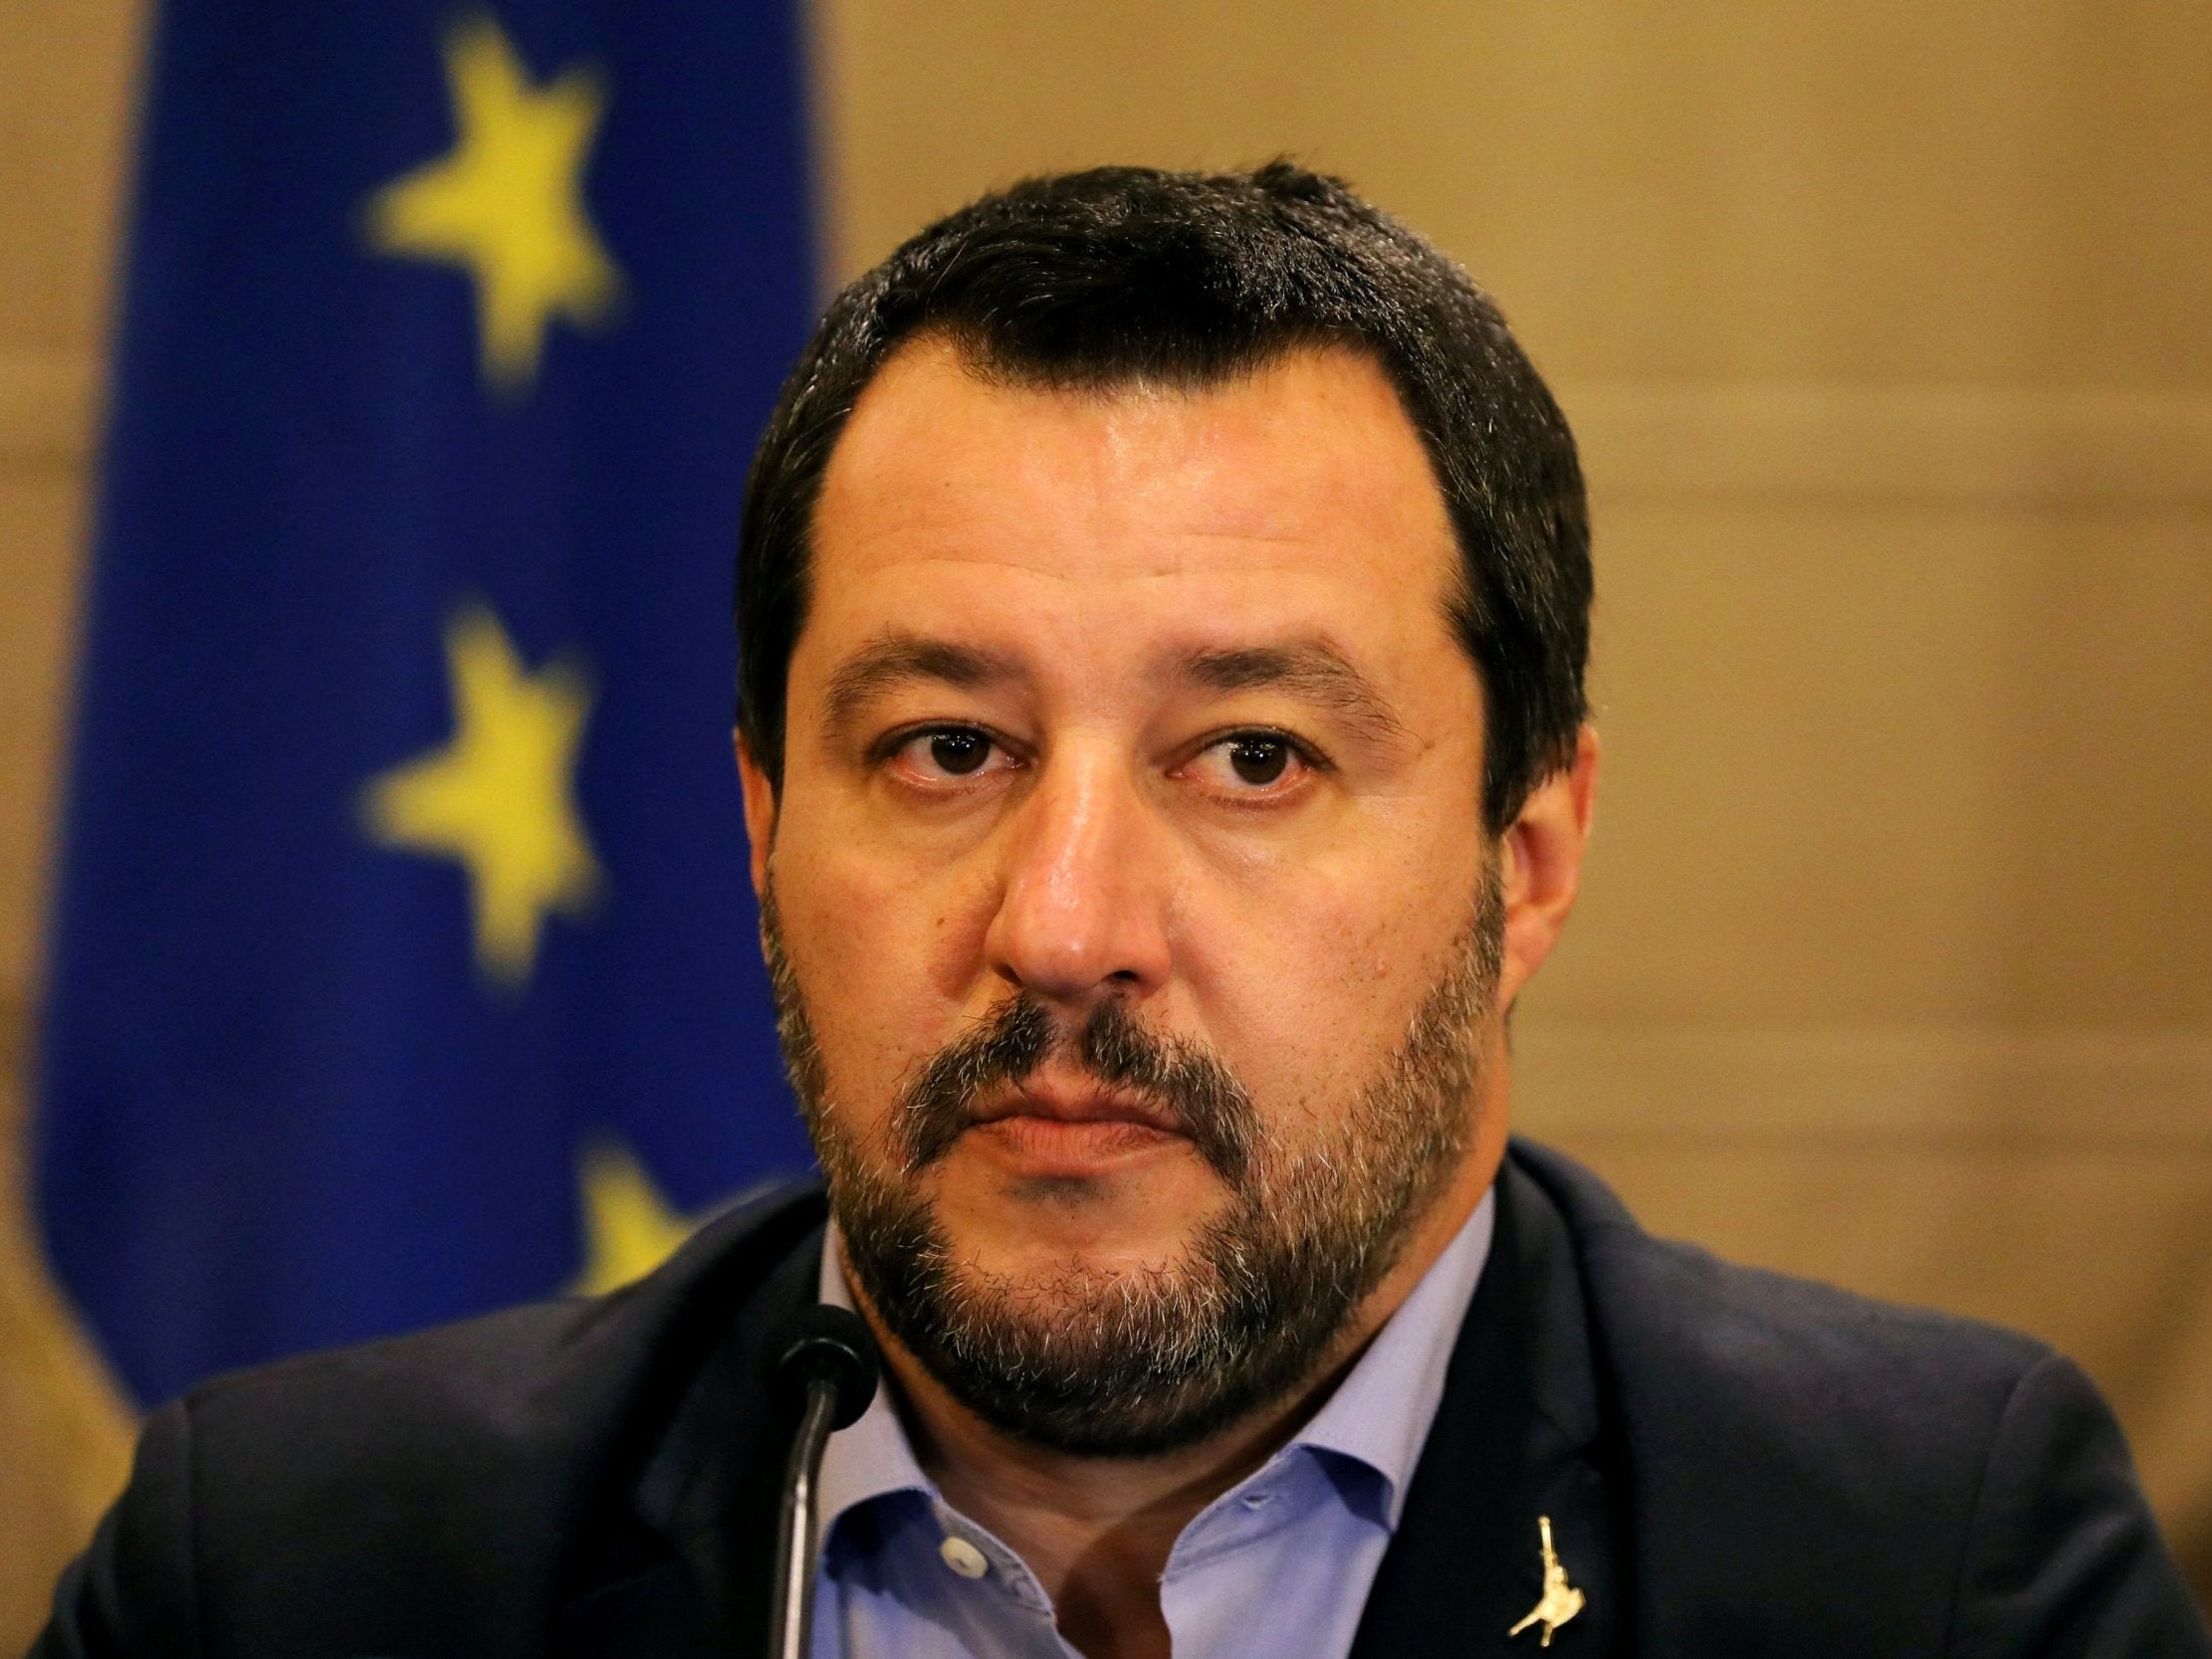 Image result for Matteo Salvini, deputy Prime Minister and powerful head of the populist League party,